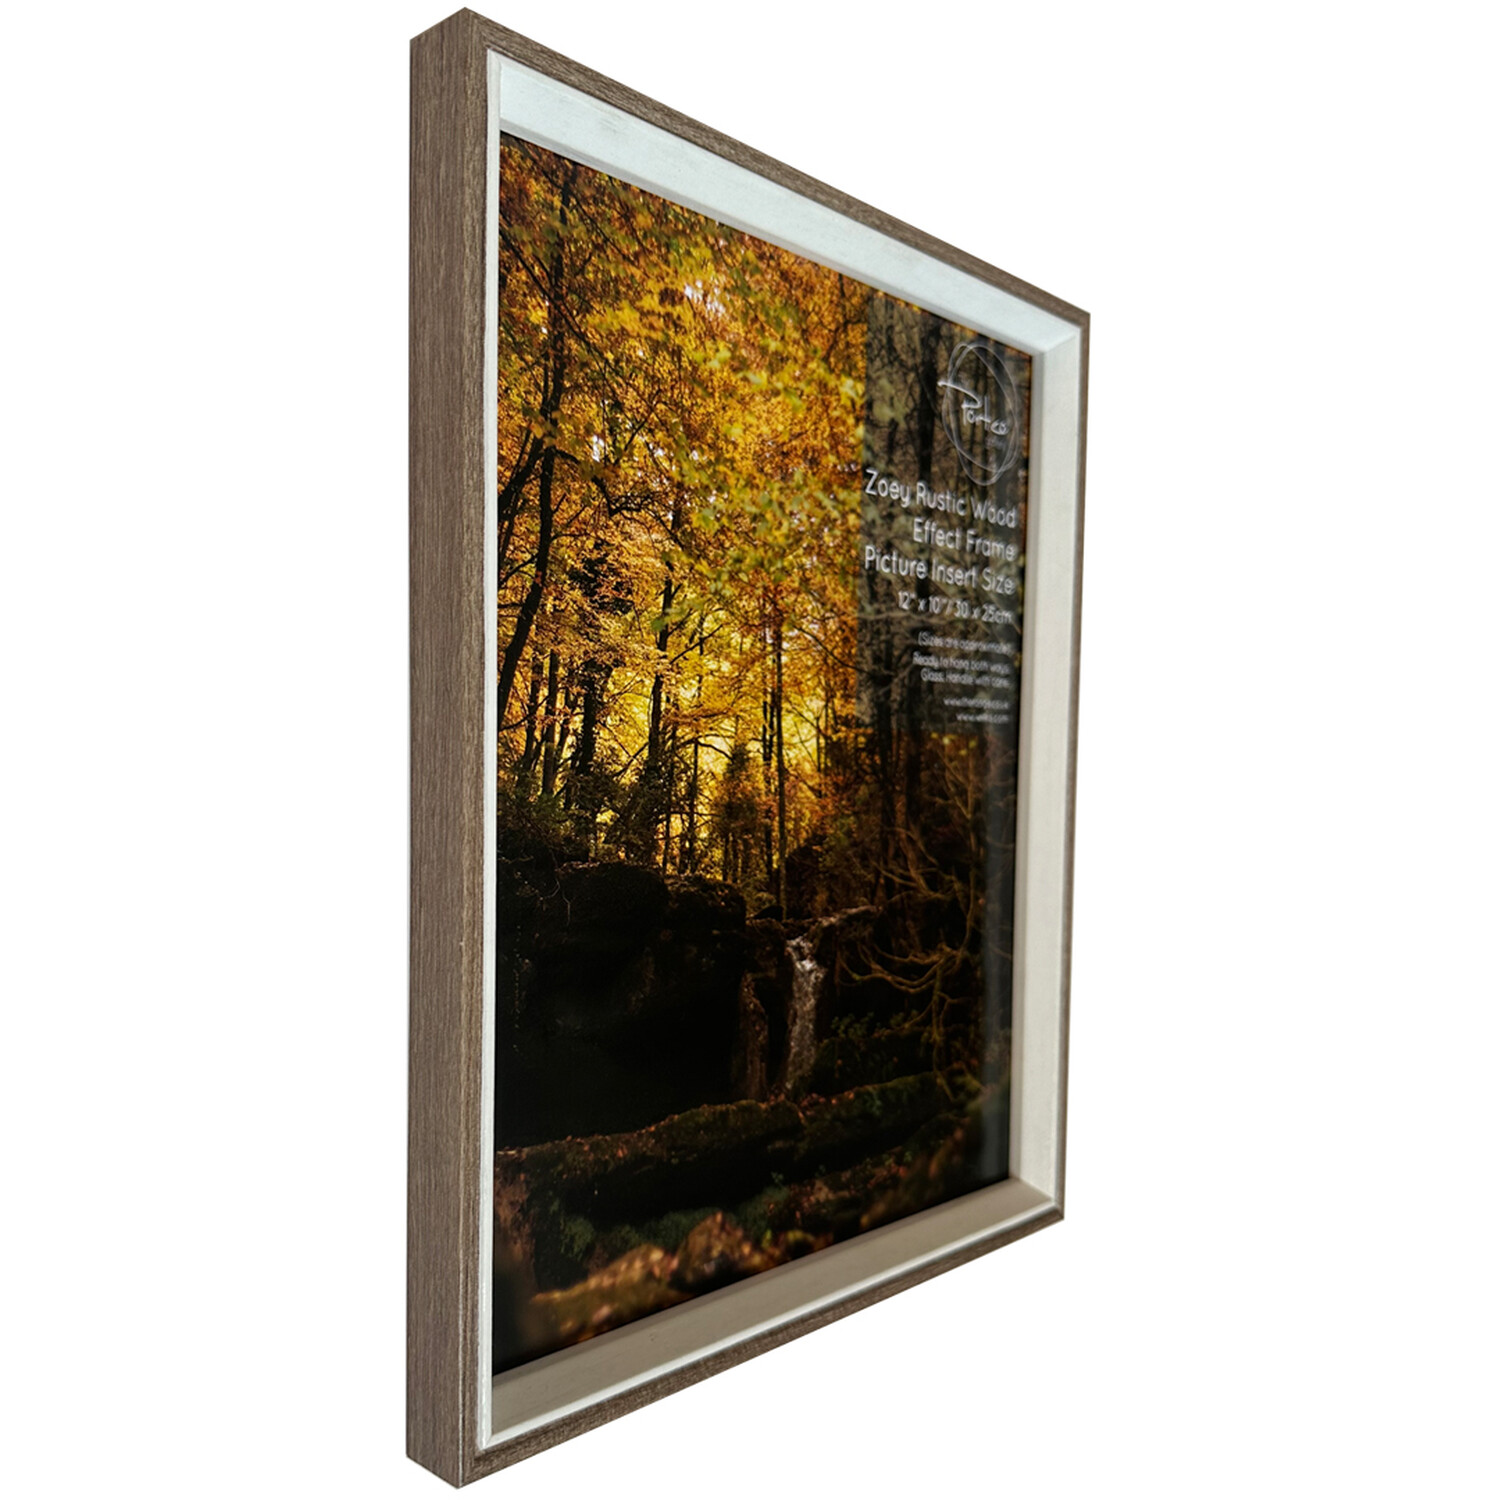 Zoey Rustic Wood Effect Frame - Brown / 12x10in Image 2